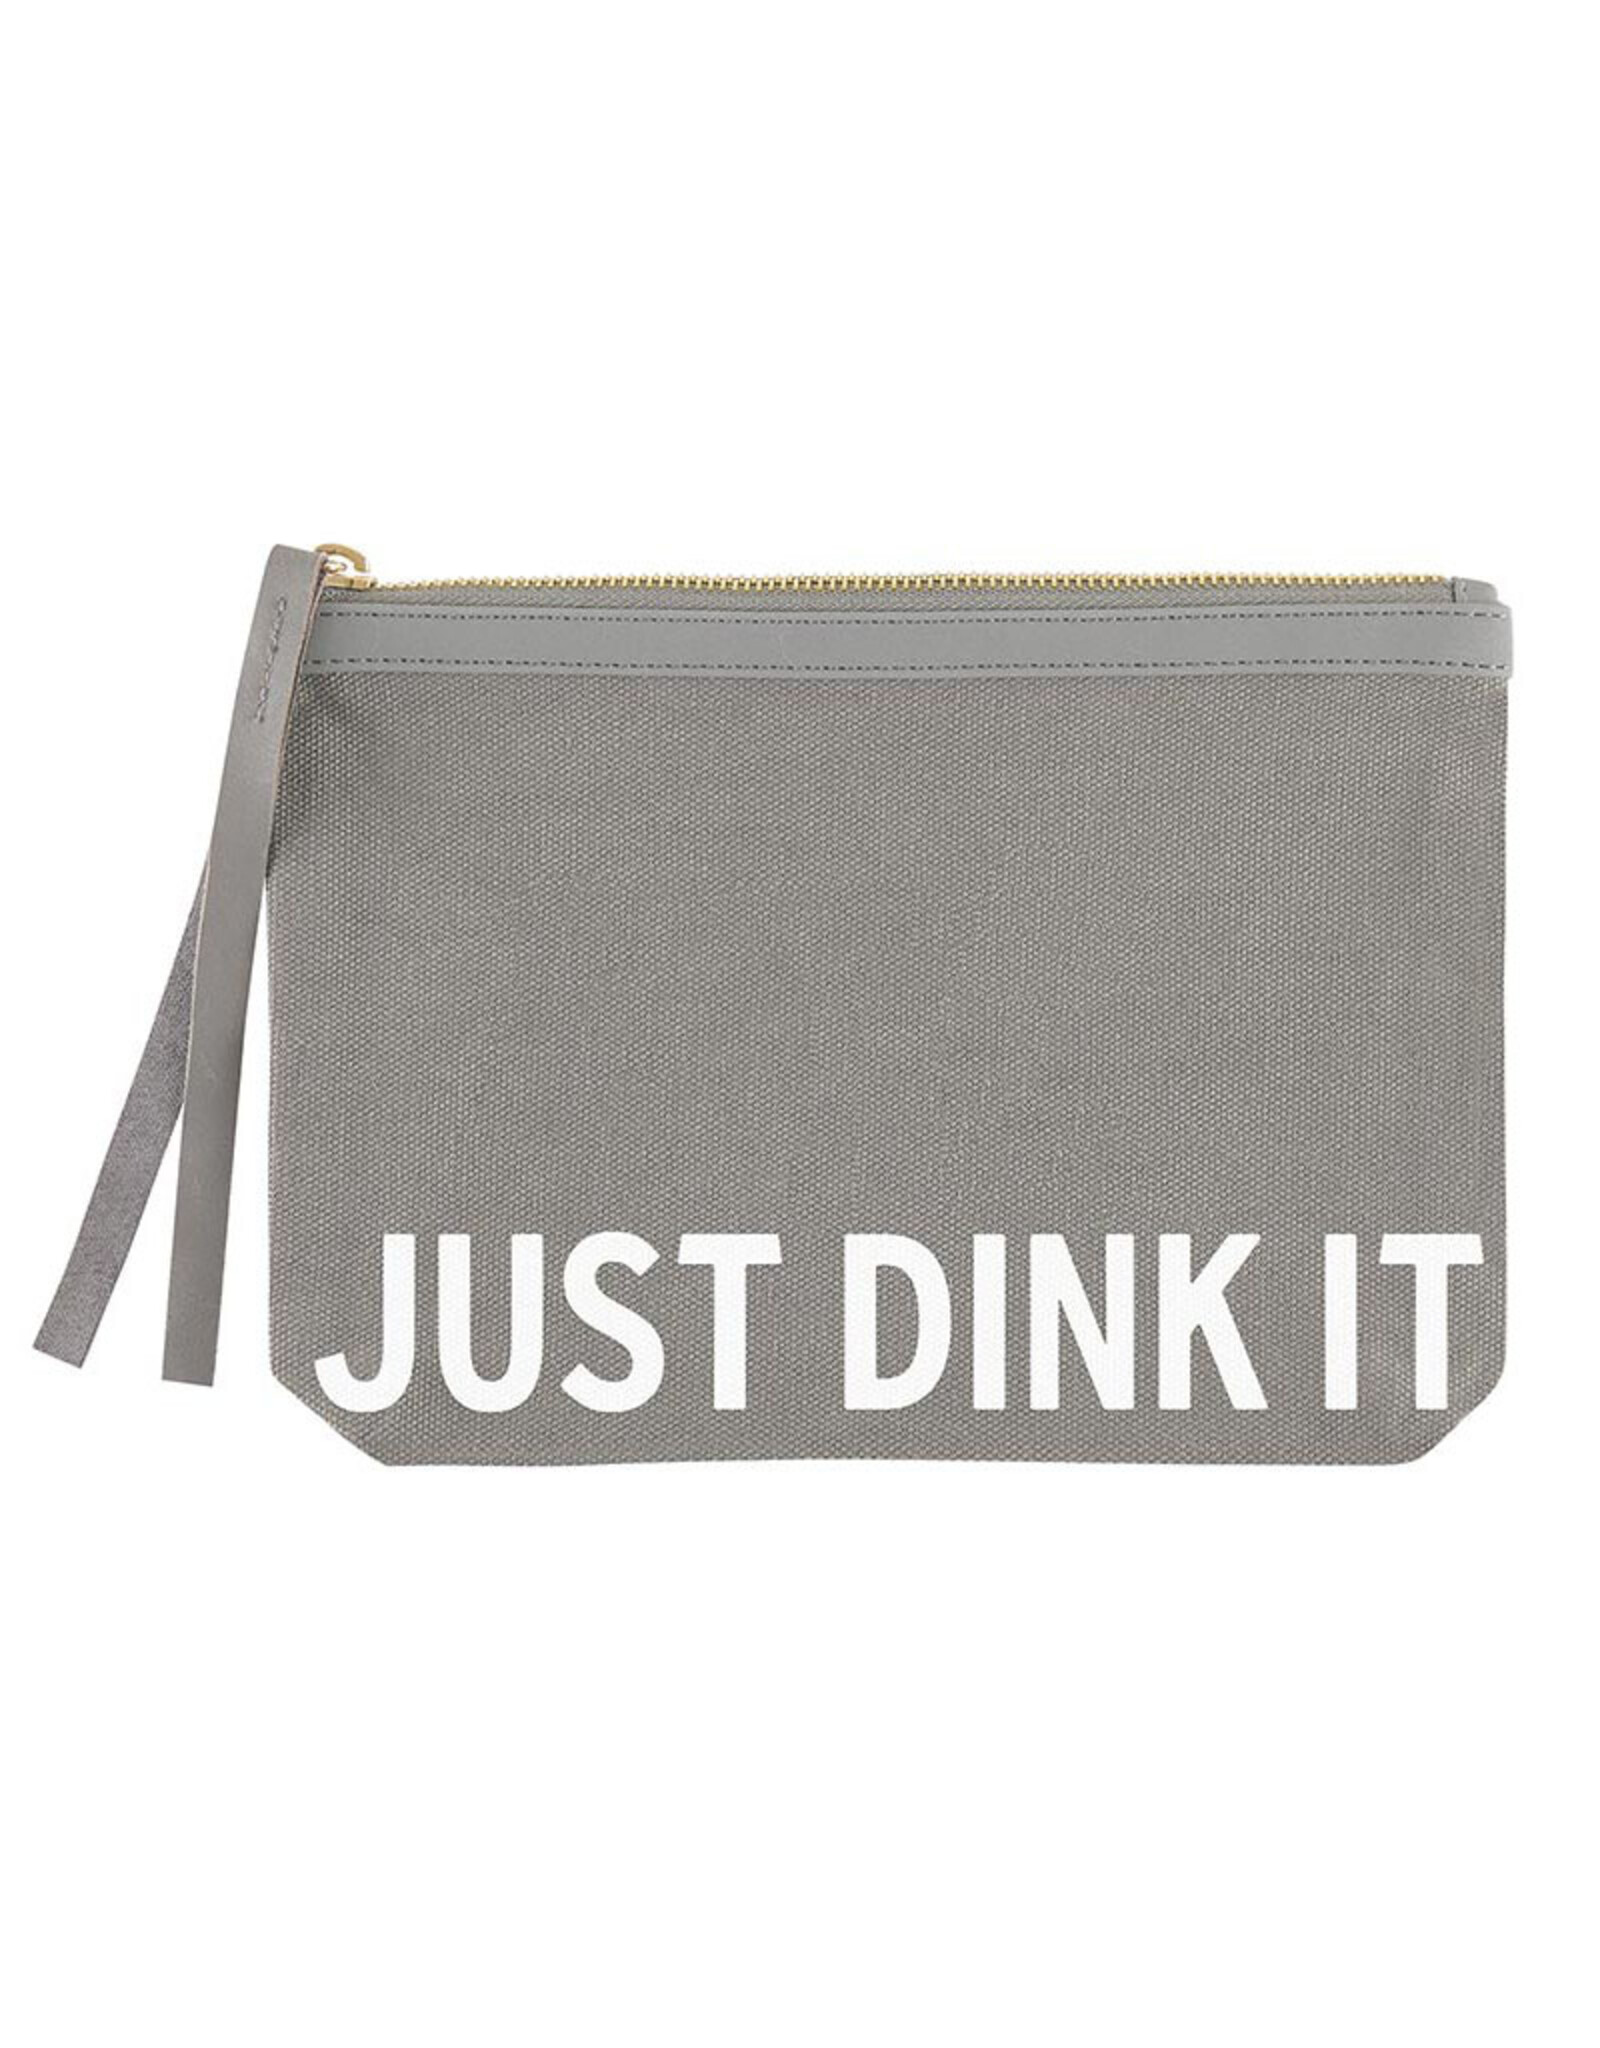 CREATIVE BRANDS JUST DINK IT POUCH